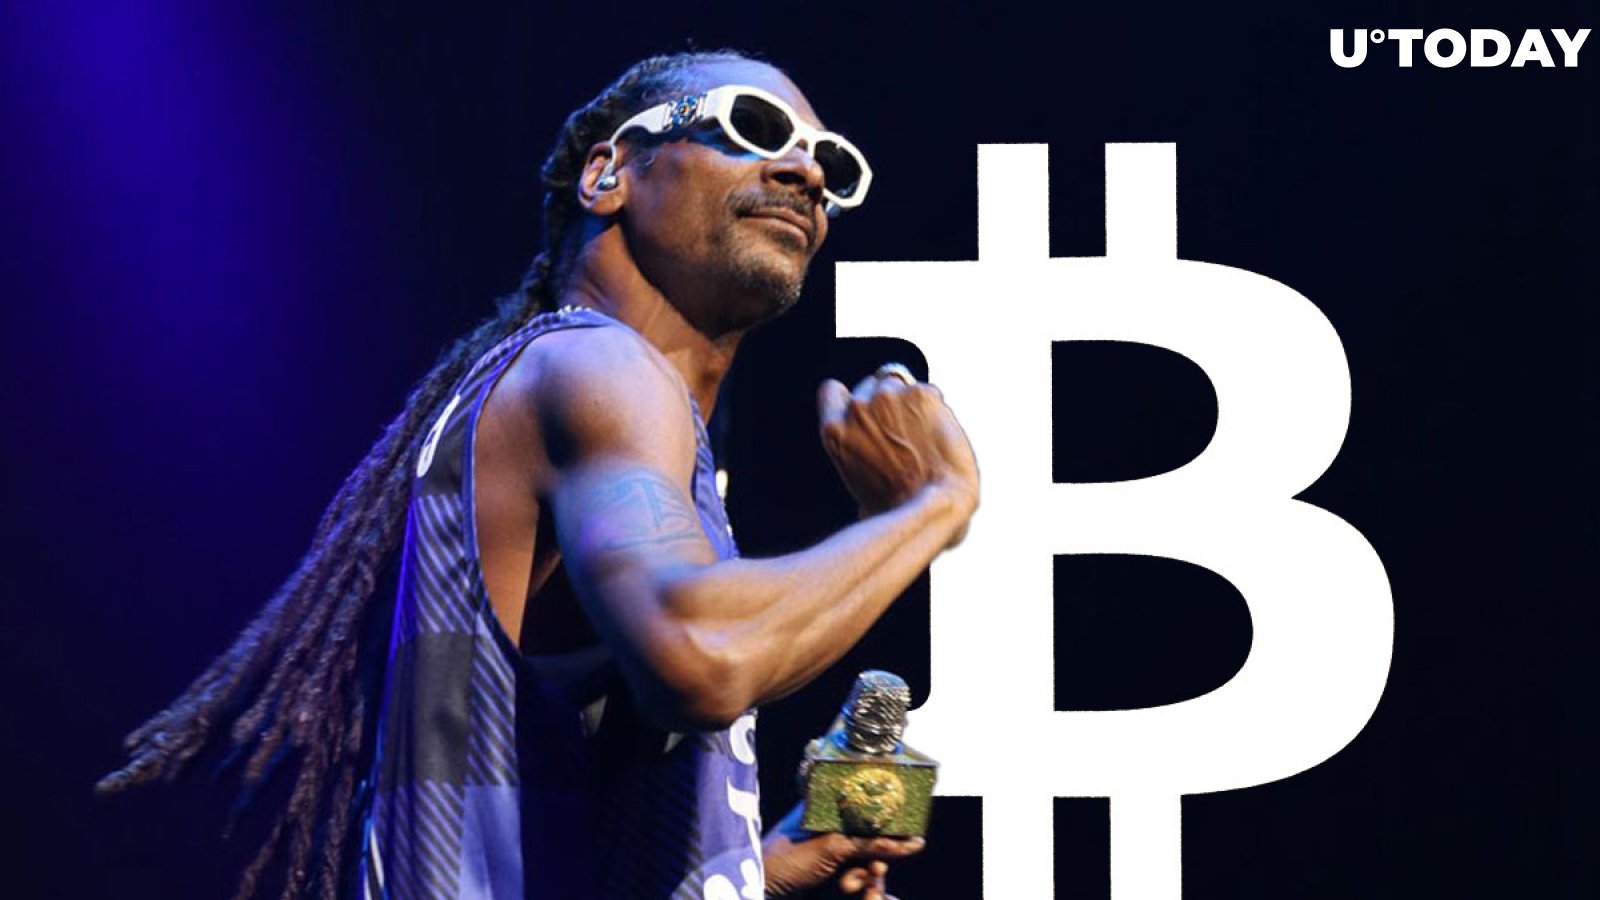 Bitcoin Scores Its Latest Celebrity Endorsement from Snoop Dogg